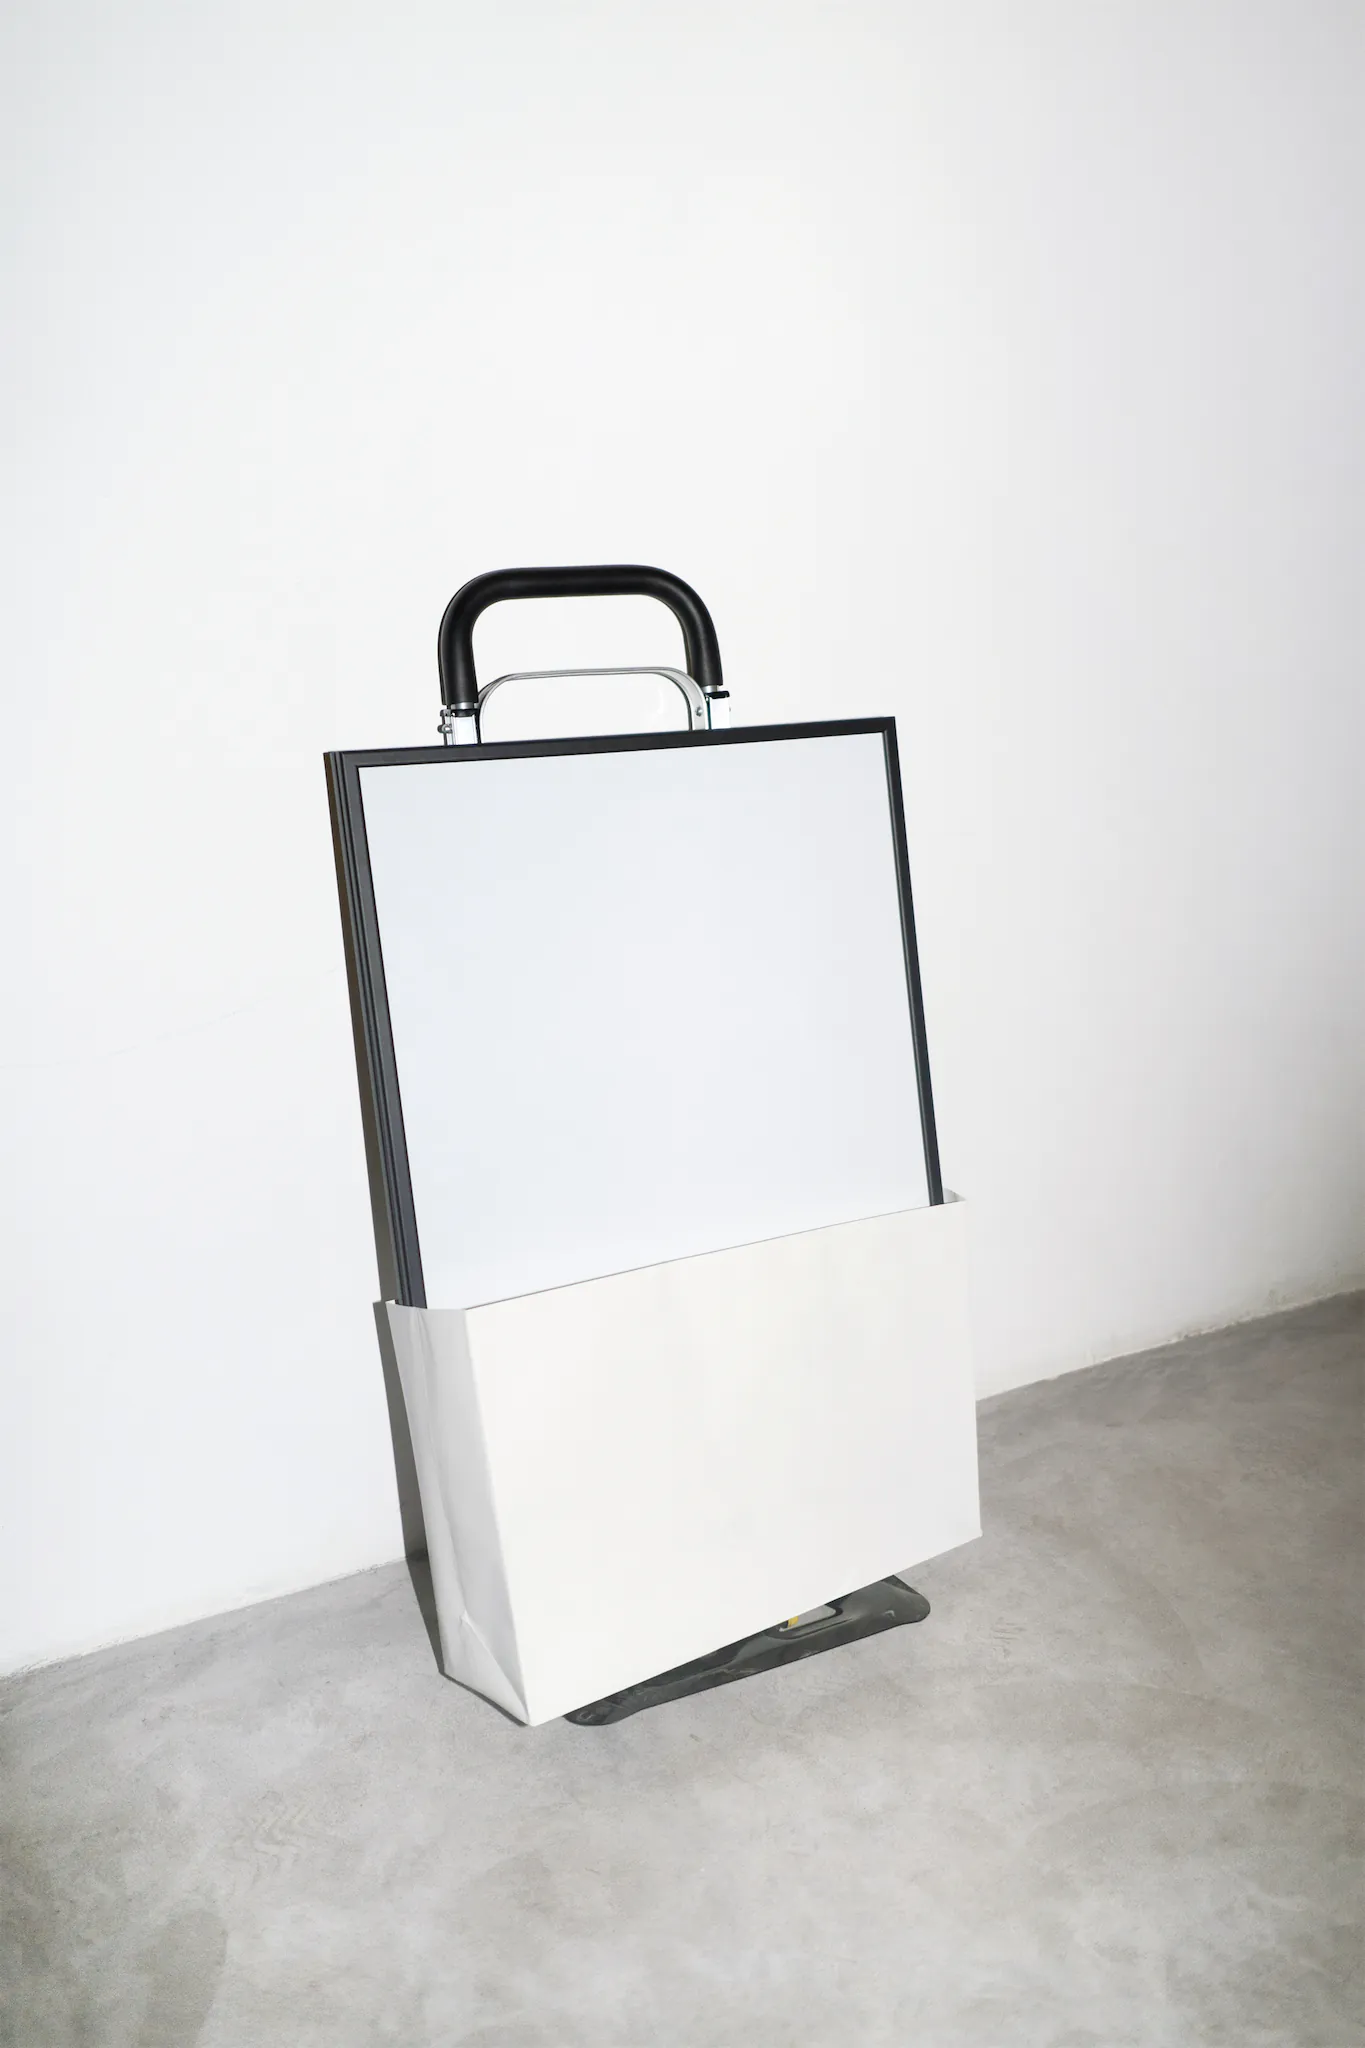 61x91cm poster mockup inside a shopping bag which is on a trolley over a concrete floor and white walls around